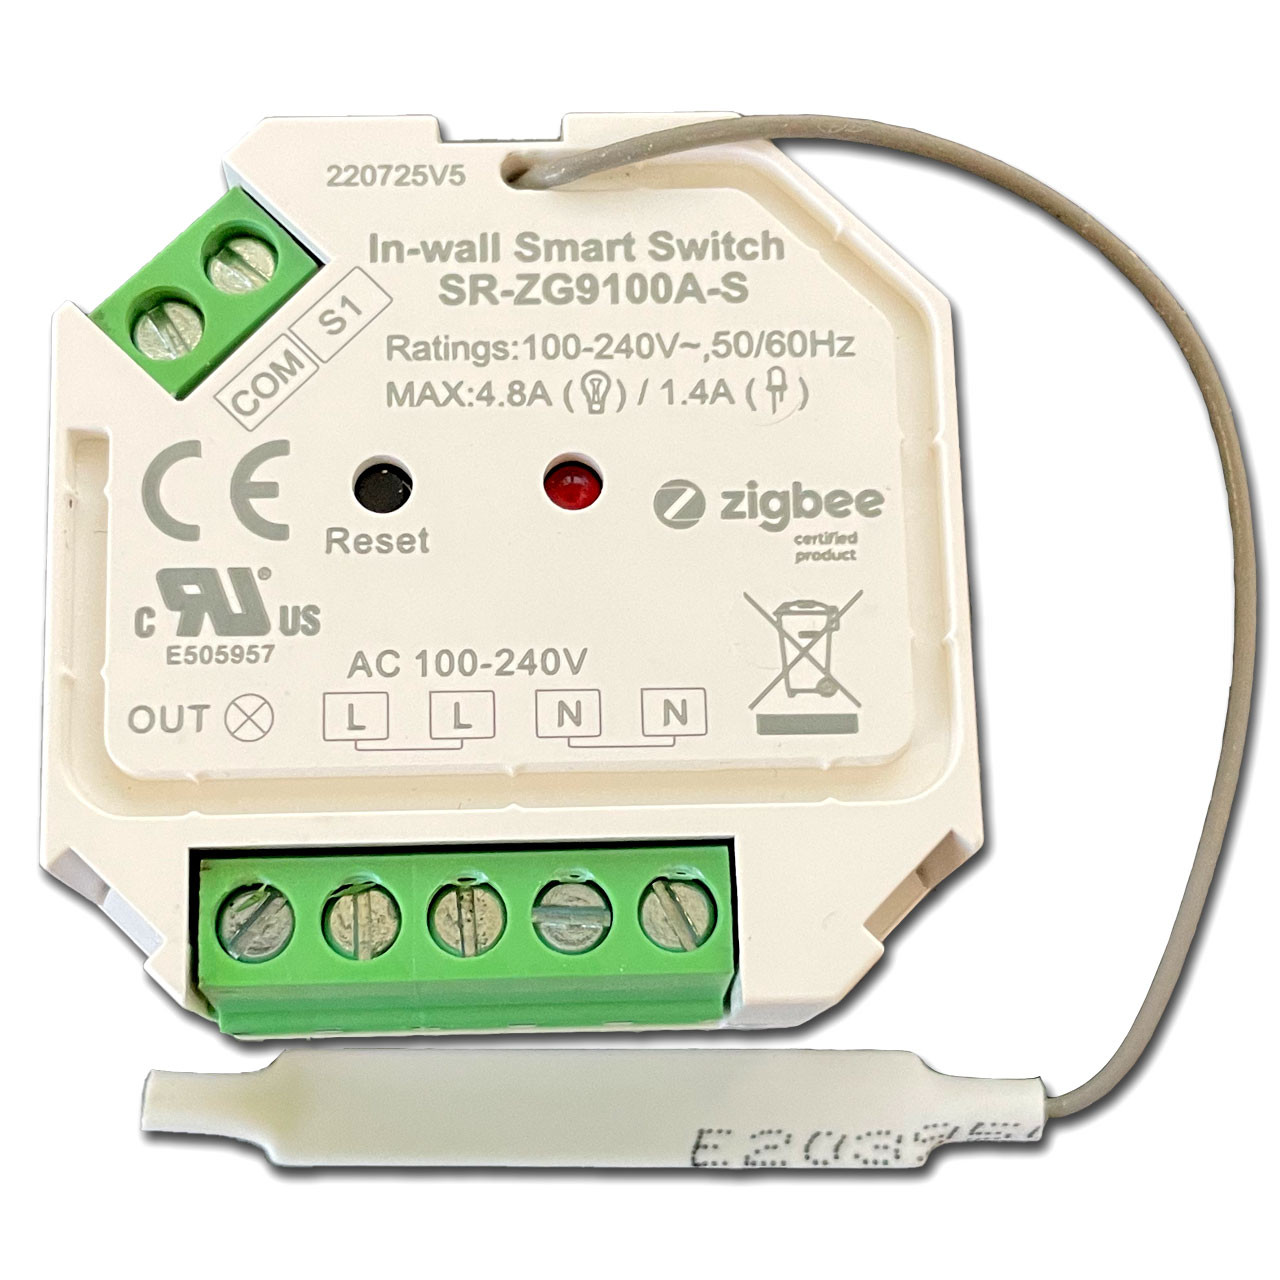 https://cdn11.bigcommerce.com/s-wlejmk/images/stencil/1280x1280/products/8058/31310/remcon-low-voltage-relay-replacement-sr-zg9100a-s__80260.1666565781.jpg?c=2